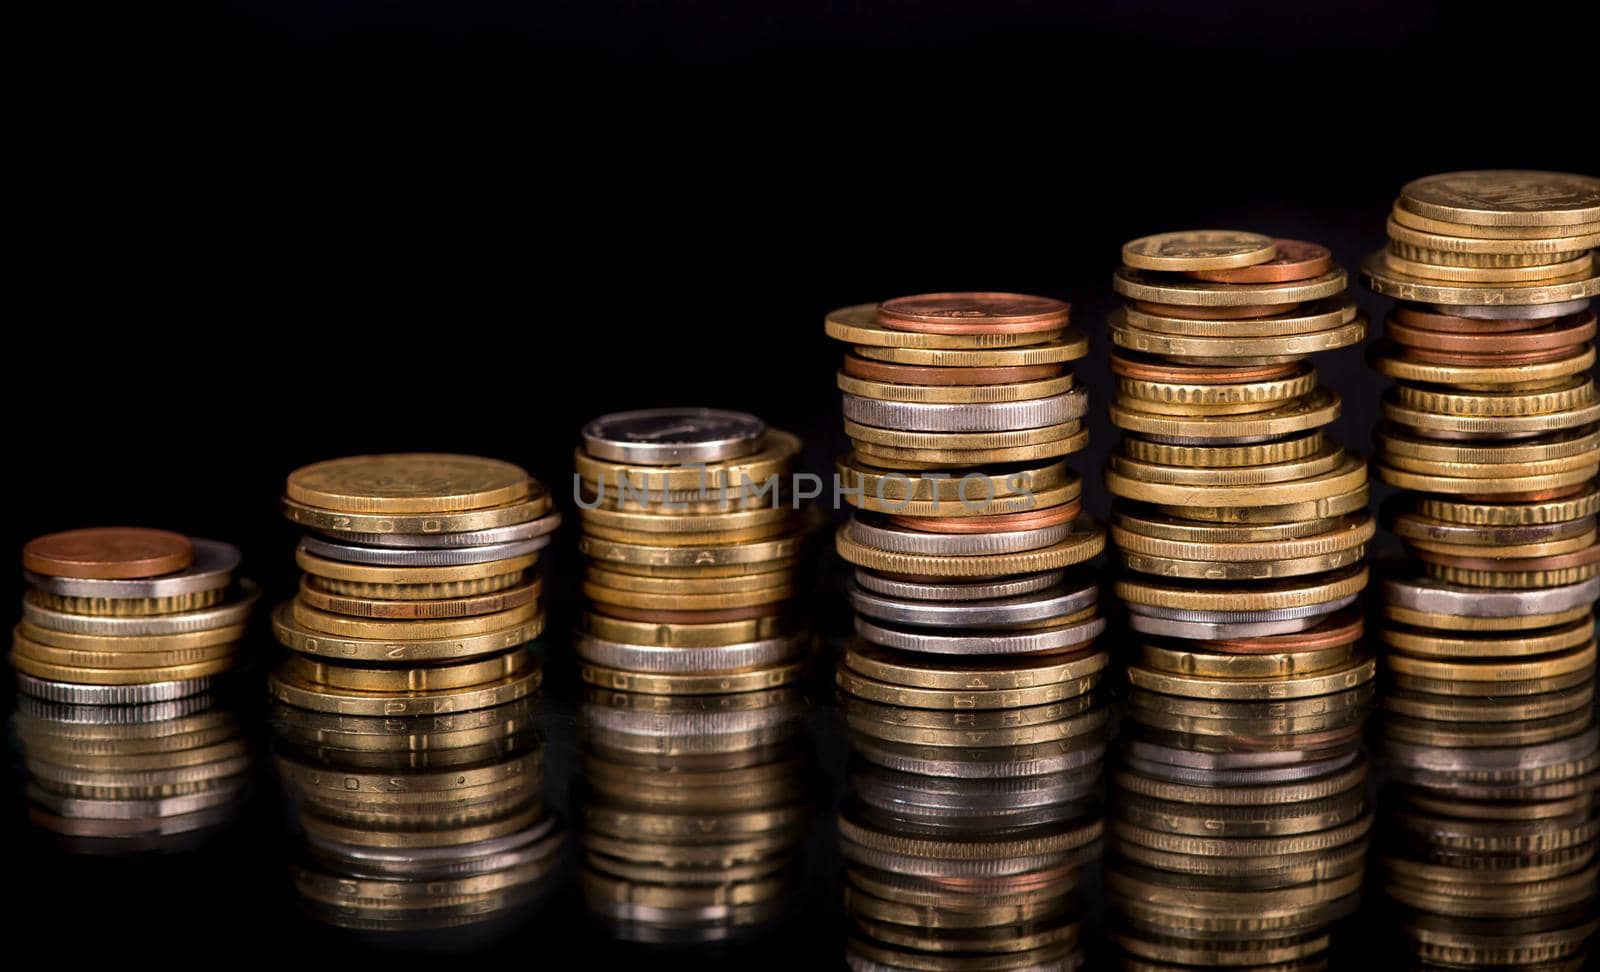 Stacks cf different country coins on black background by aprilphoto